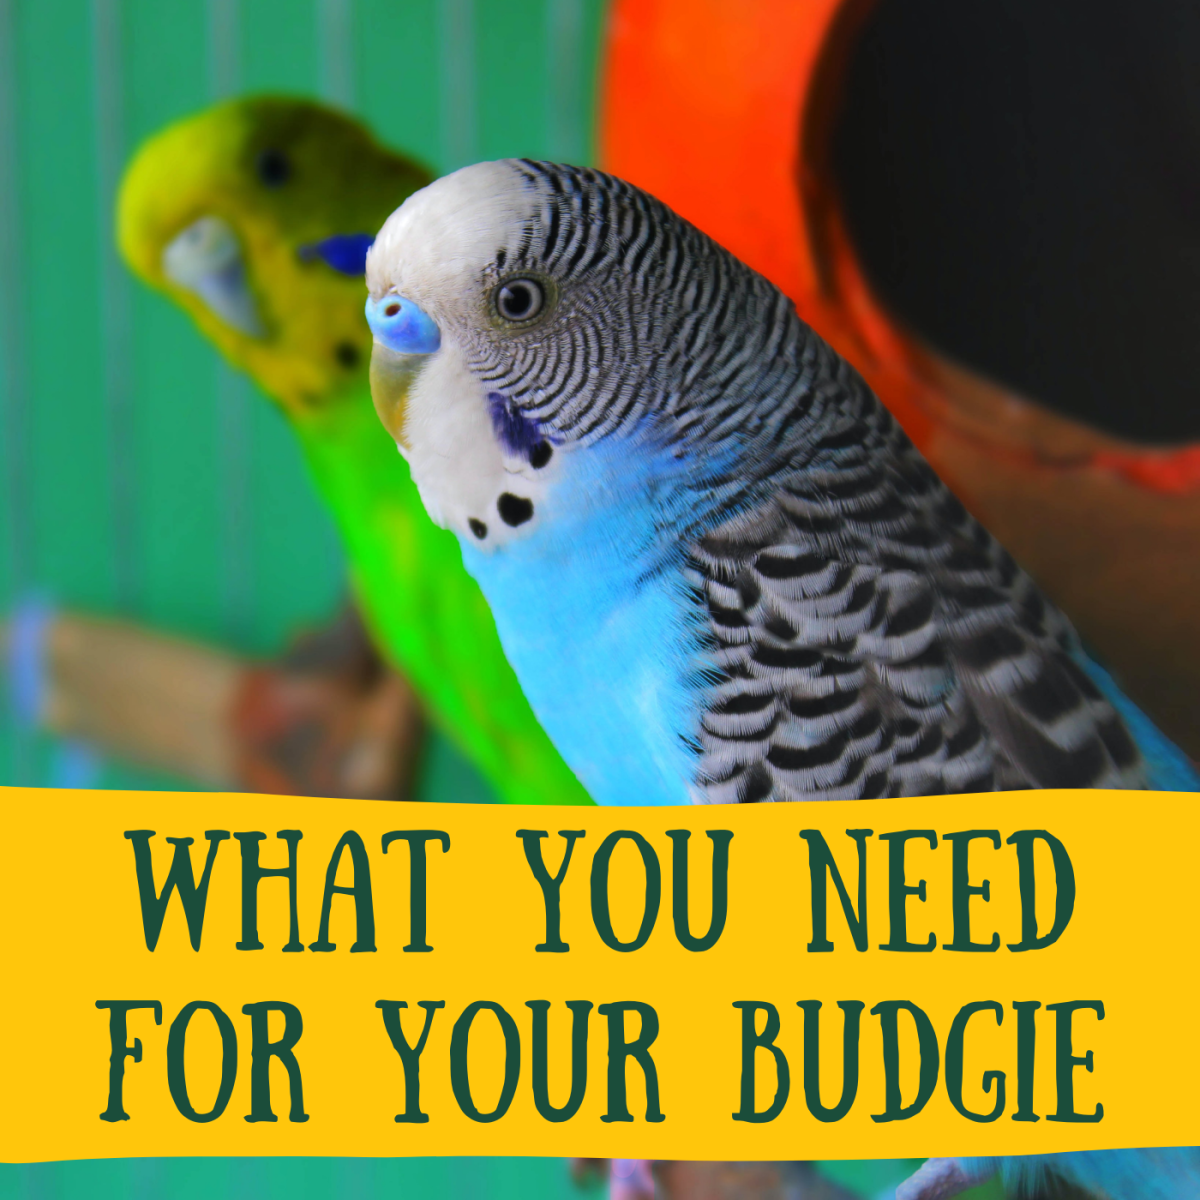 Getting a Budgie: Things You Need